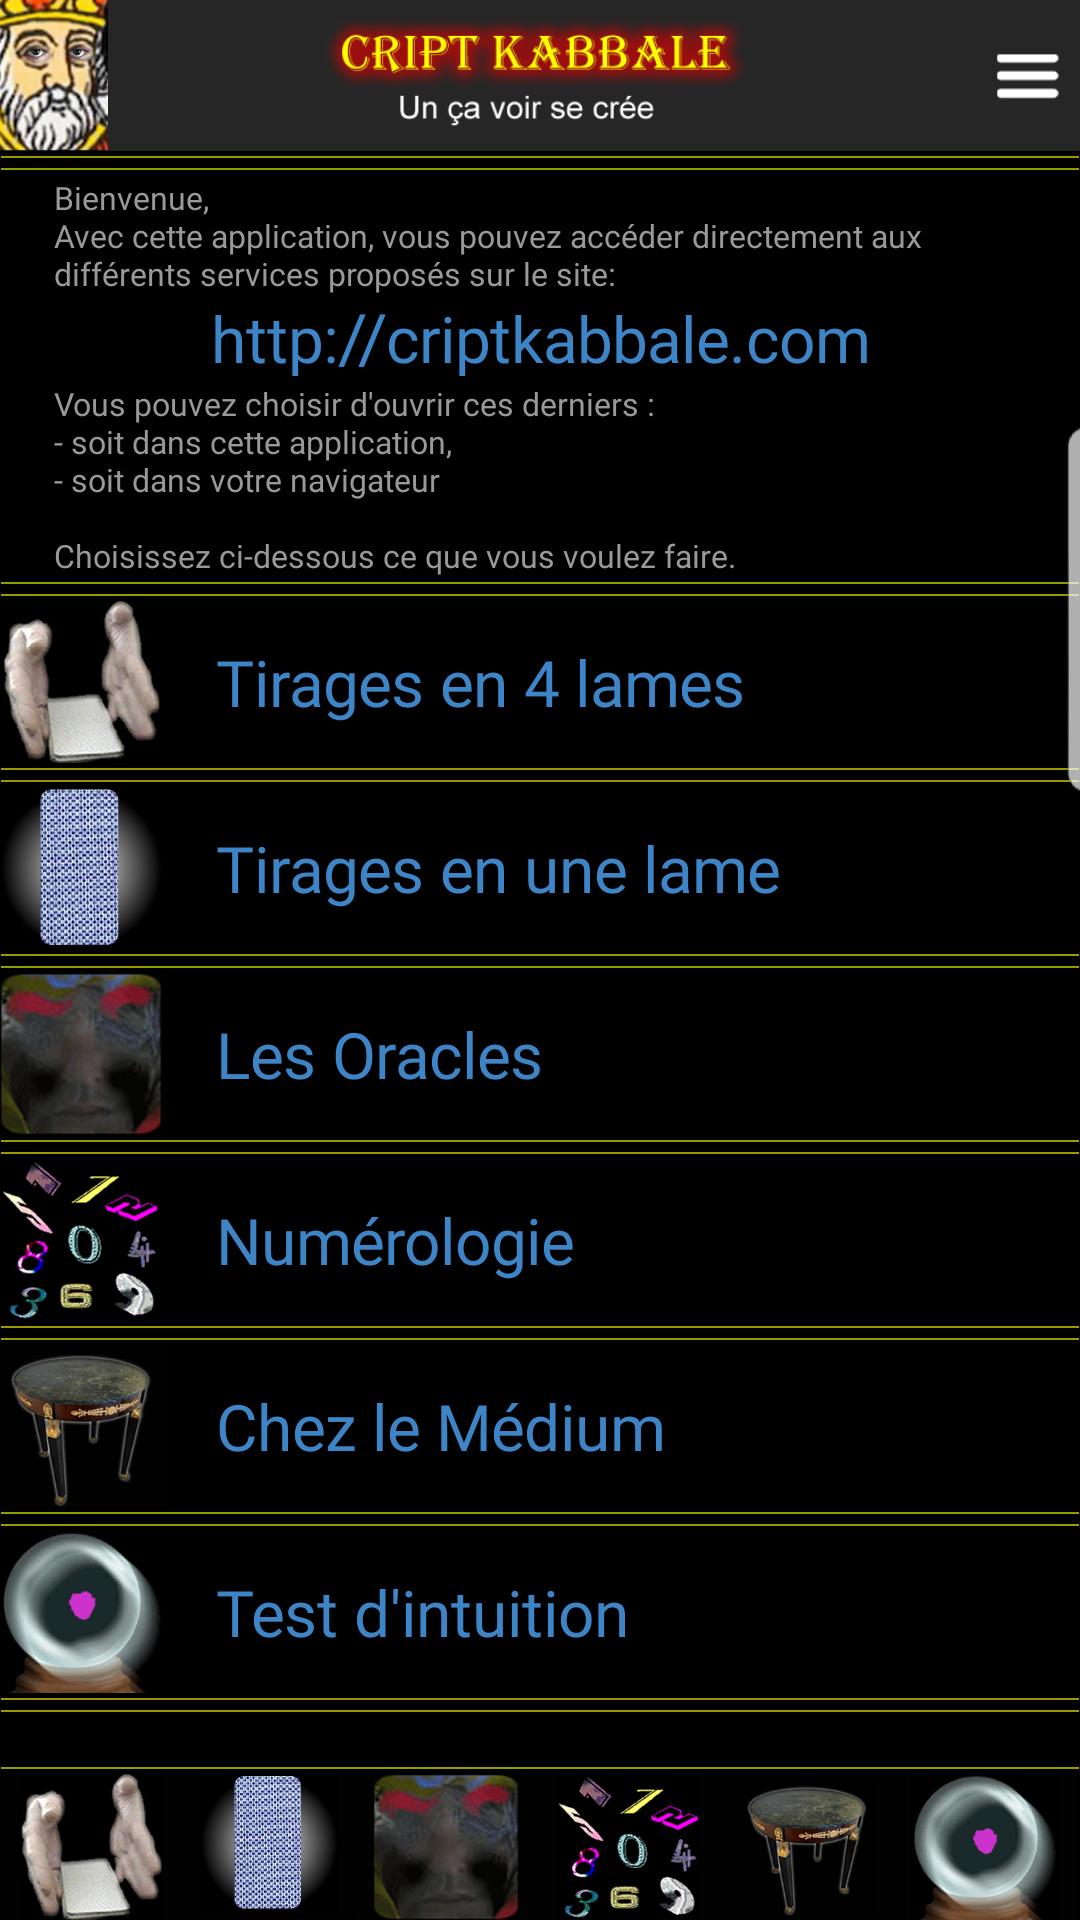 Cript Kabbale for Android - APK Download